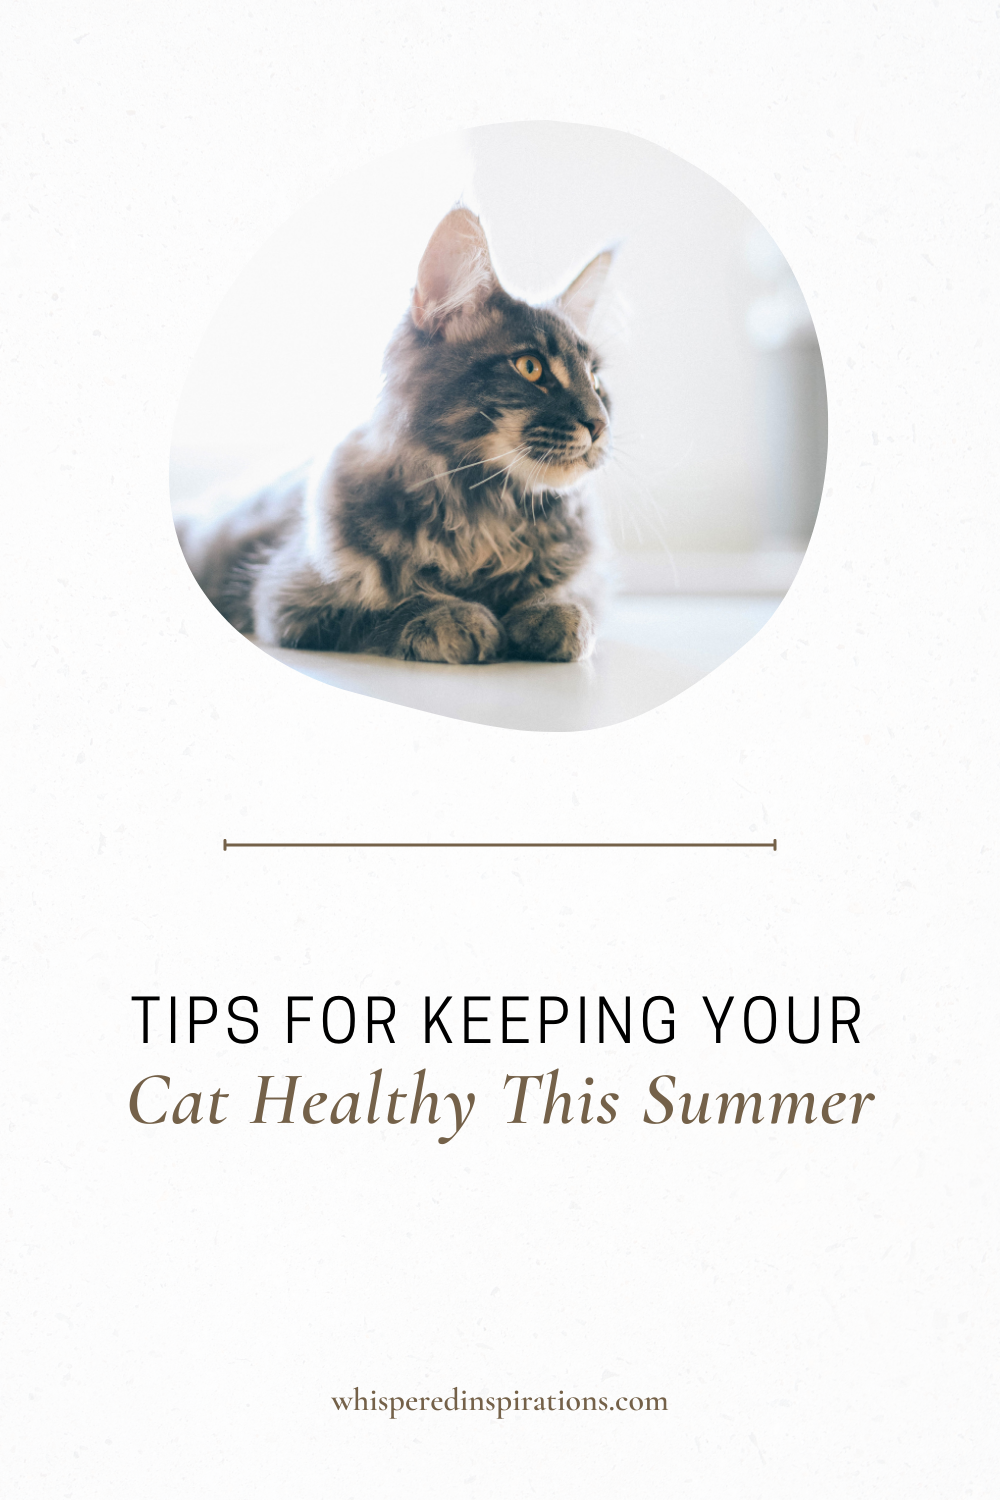 A beautiful cat sits on a bed taking in the sun. This article covers tips for keeping your cat safe this summer.